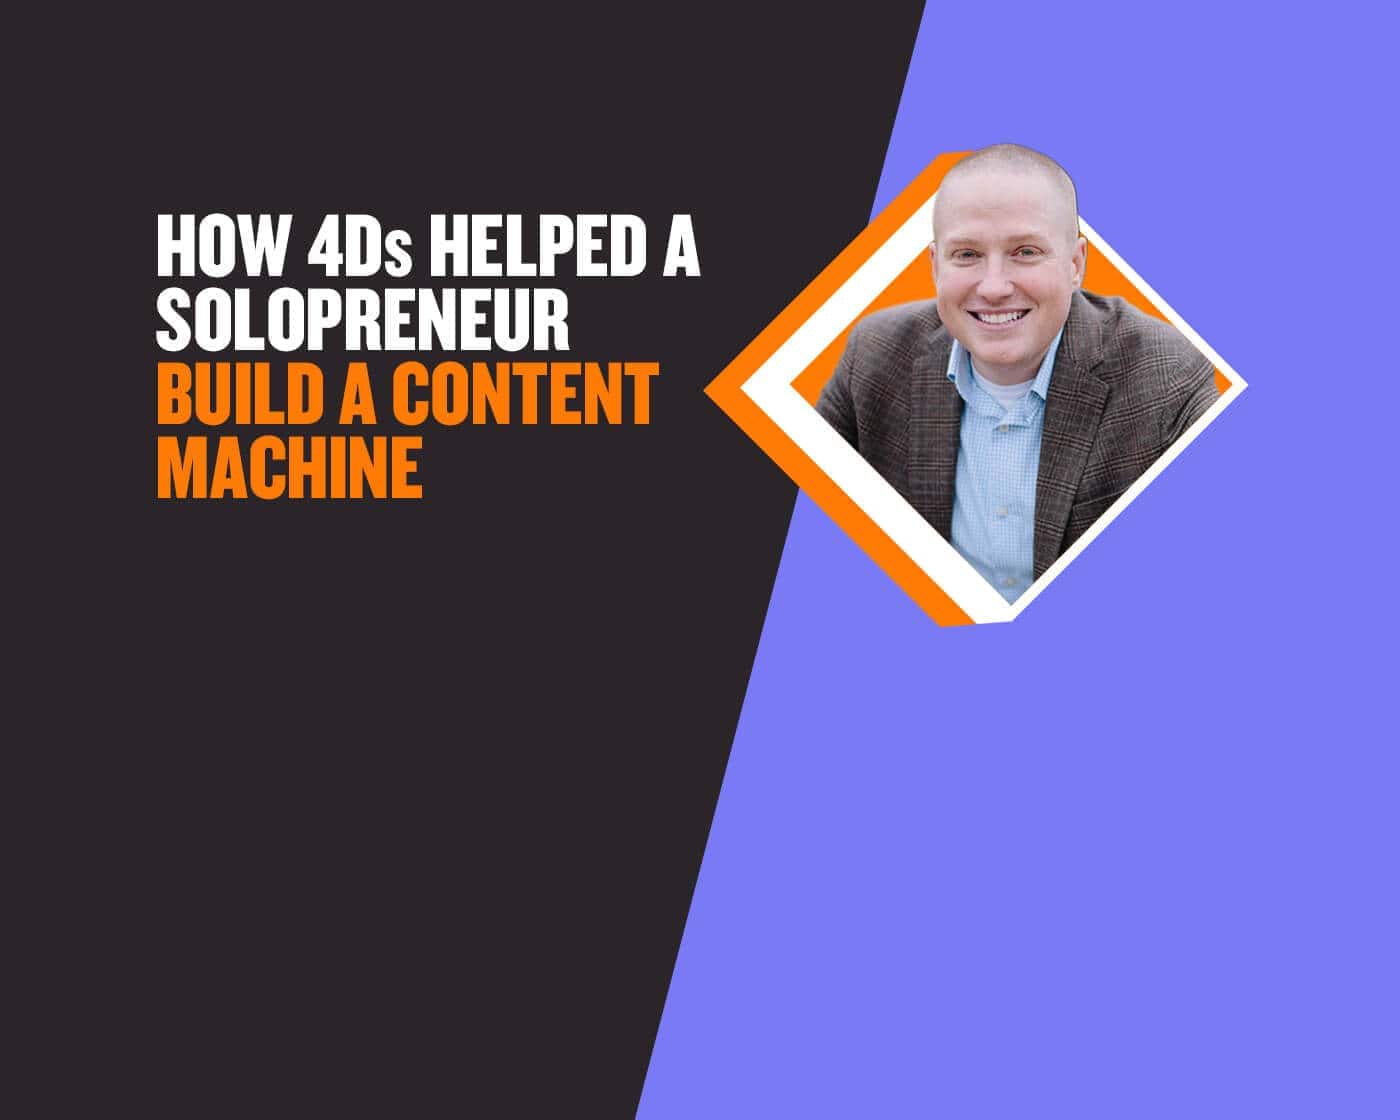 Post 4Ds: How 4Ds Helped a Solopreneur Build a Content Machine